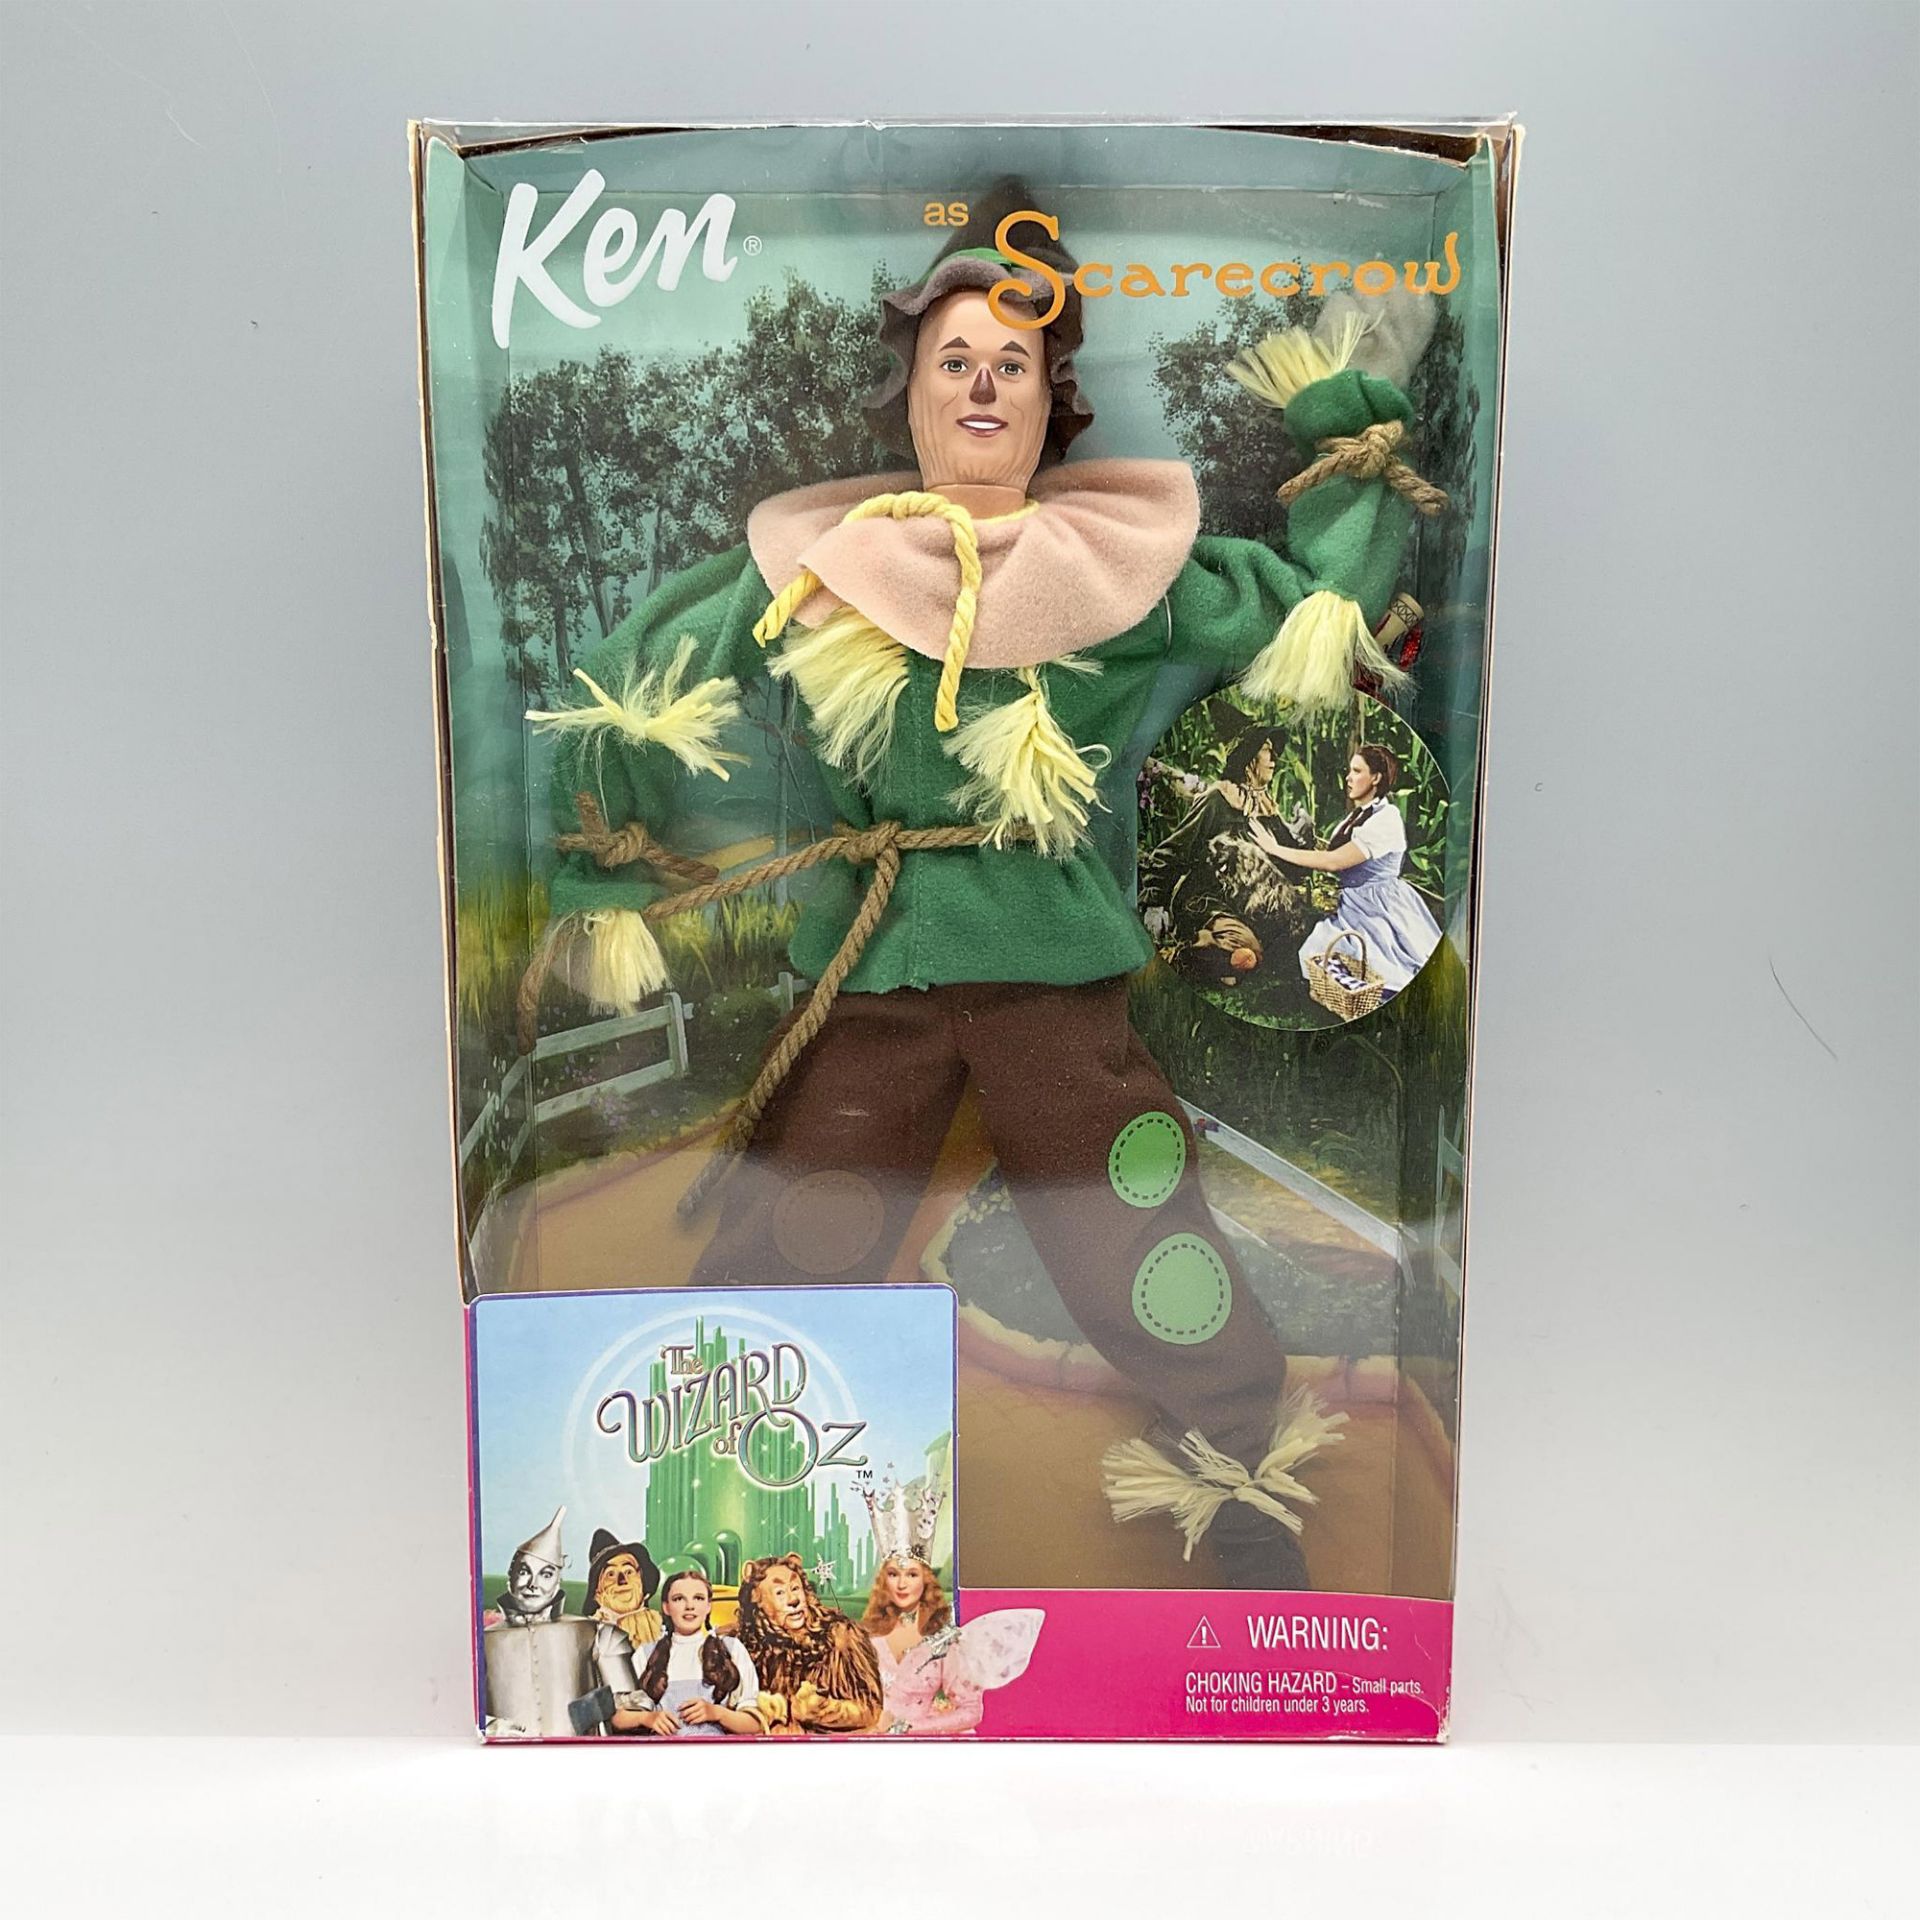 Mattel Ken Doll, The Wizard of Oz as Scarecrow, New in Box